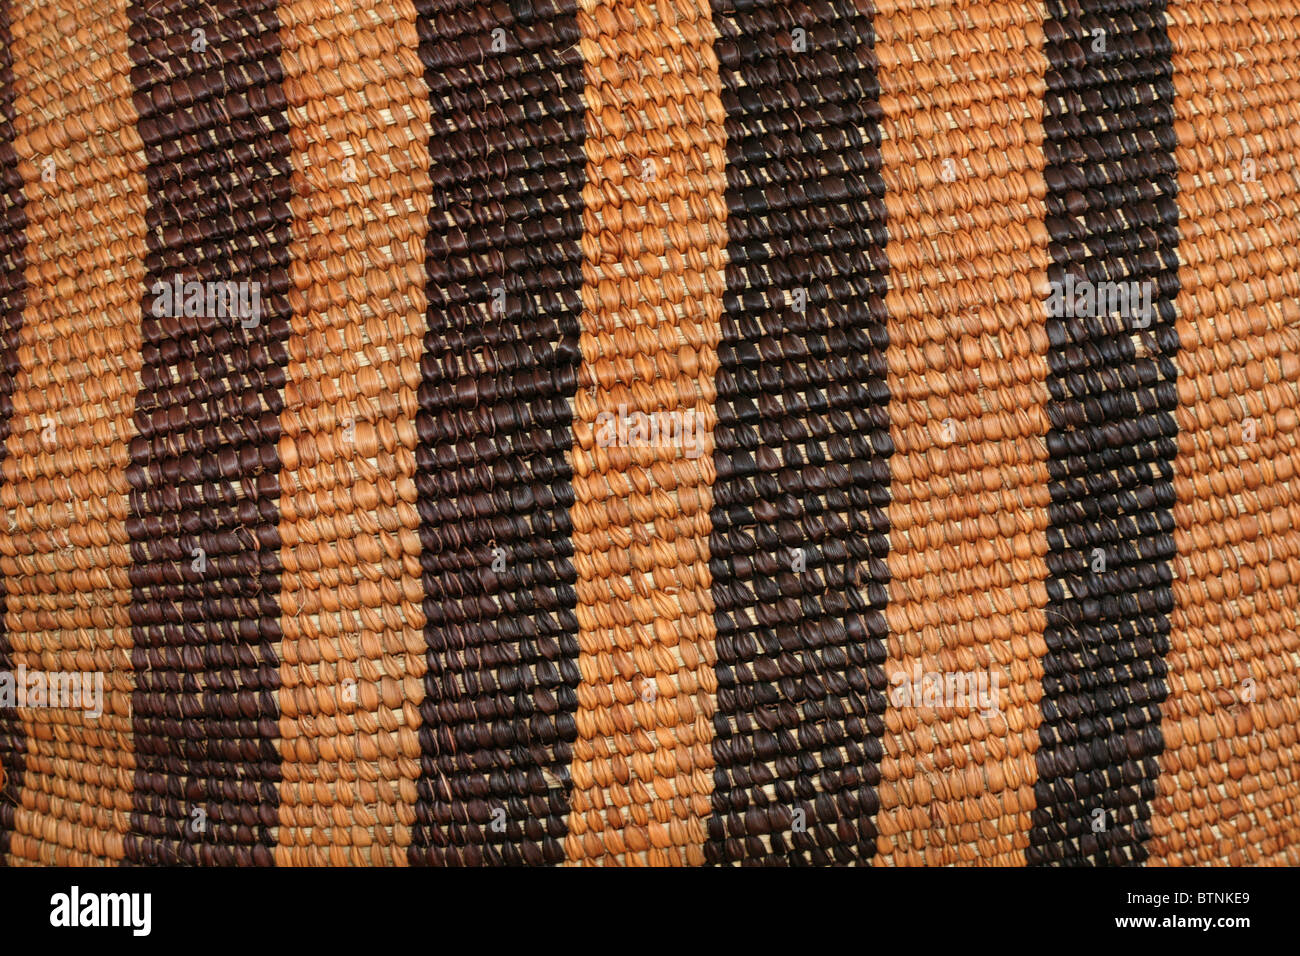 striped african woven bag background texture detail Stock Photo